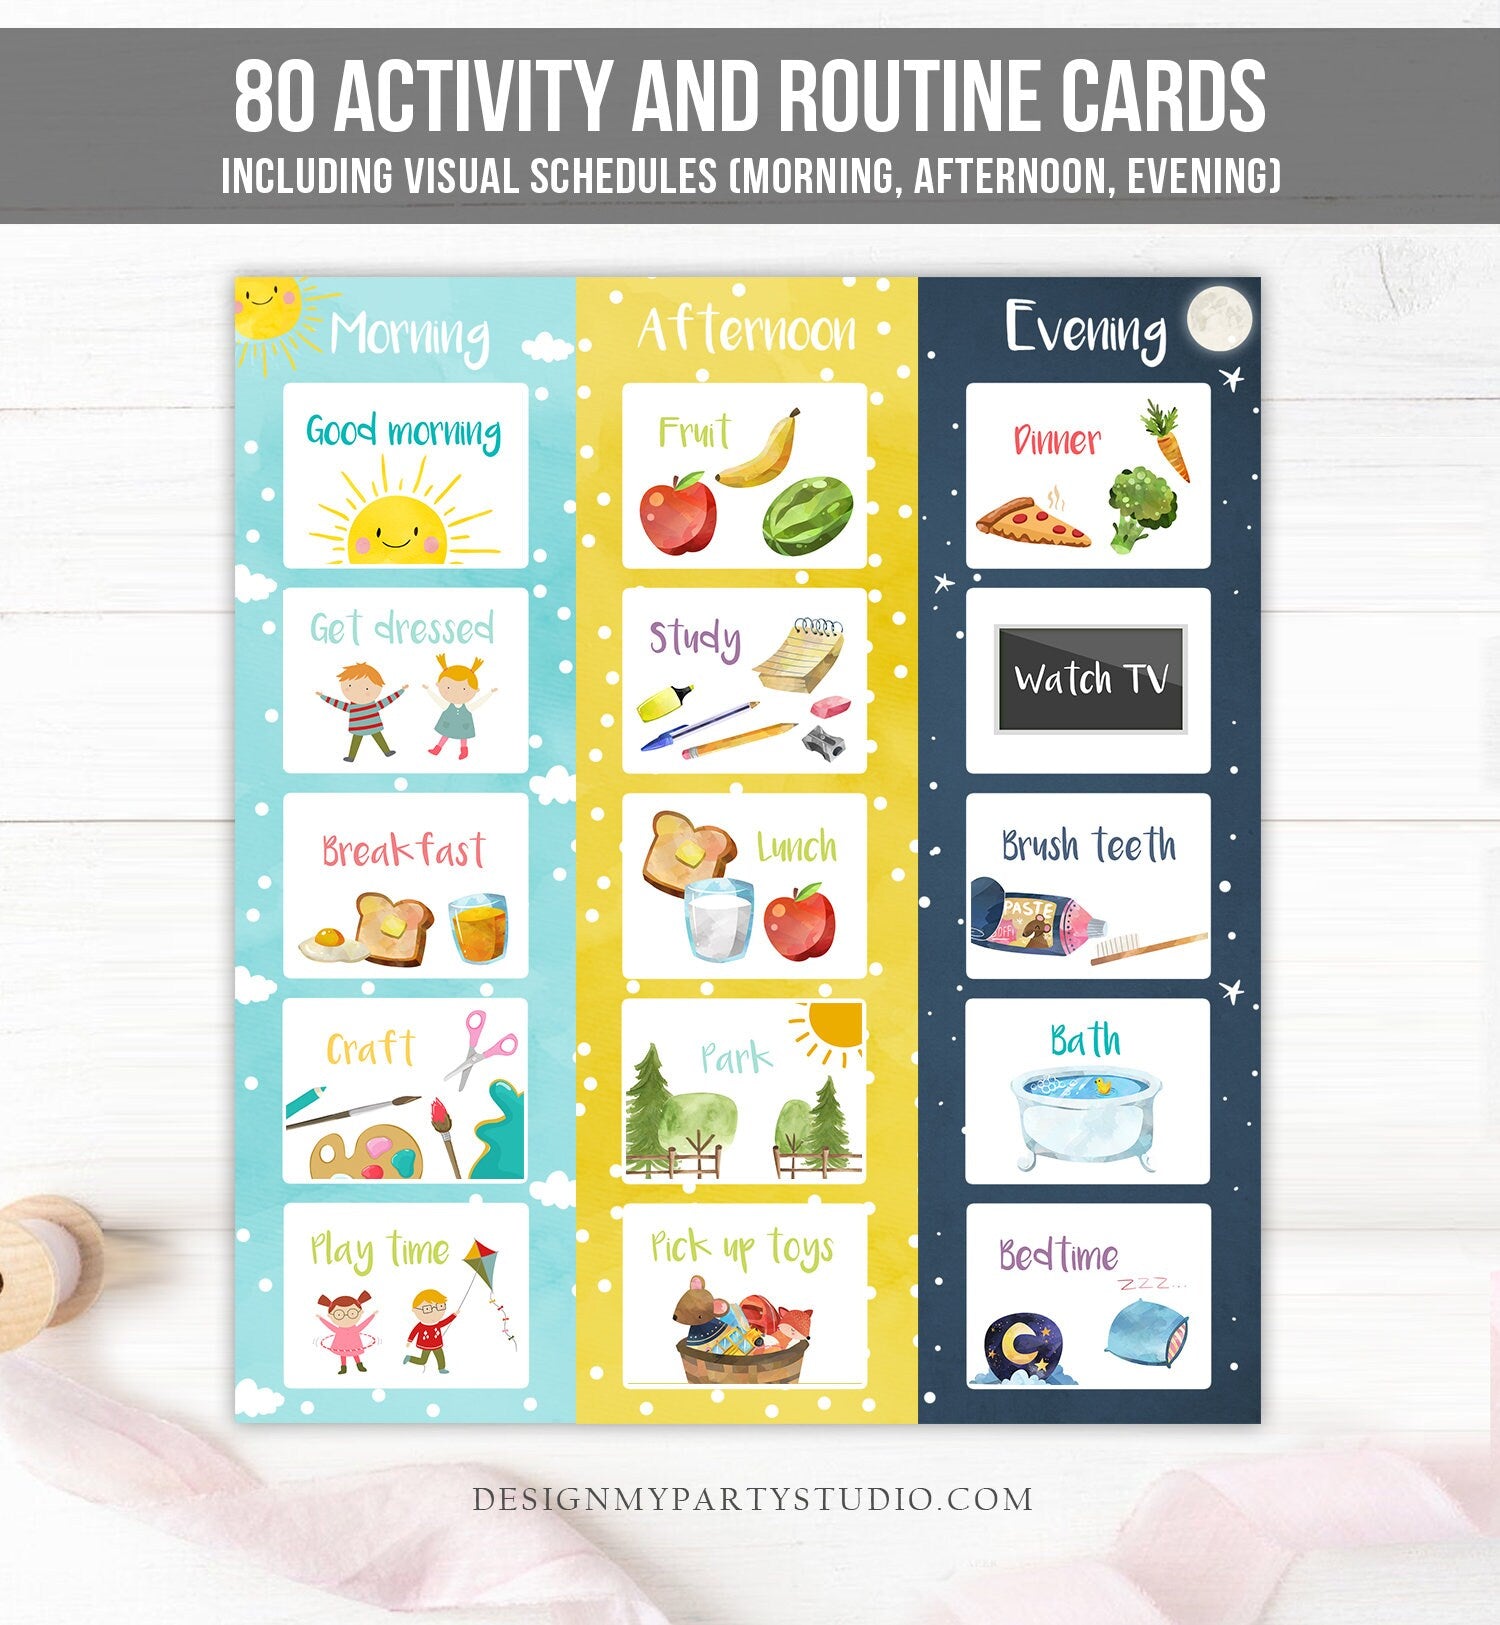 Visual Schedule Kids Daily Routine Chart 80 Cards Chores School Homeschool Toddler Preschoolers Calendar Daycare Download Printable 0341